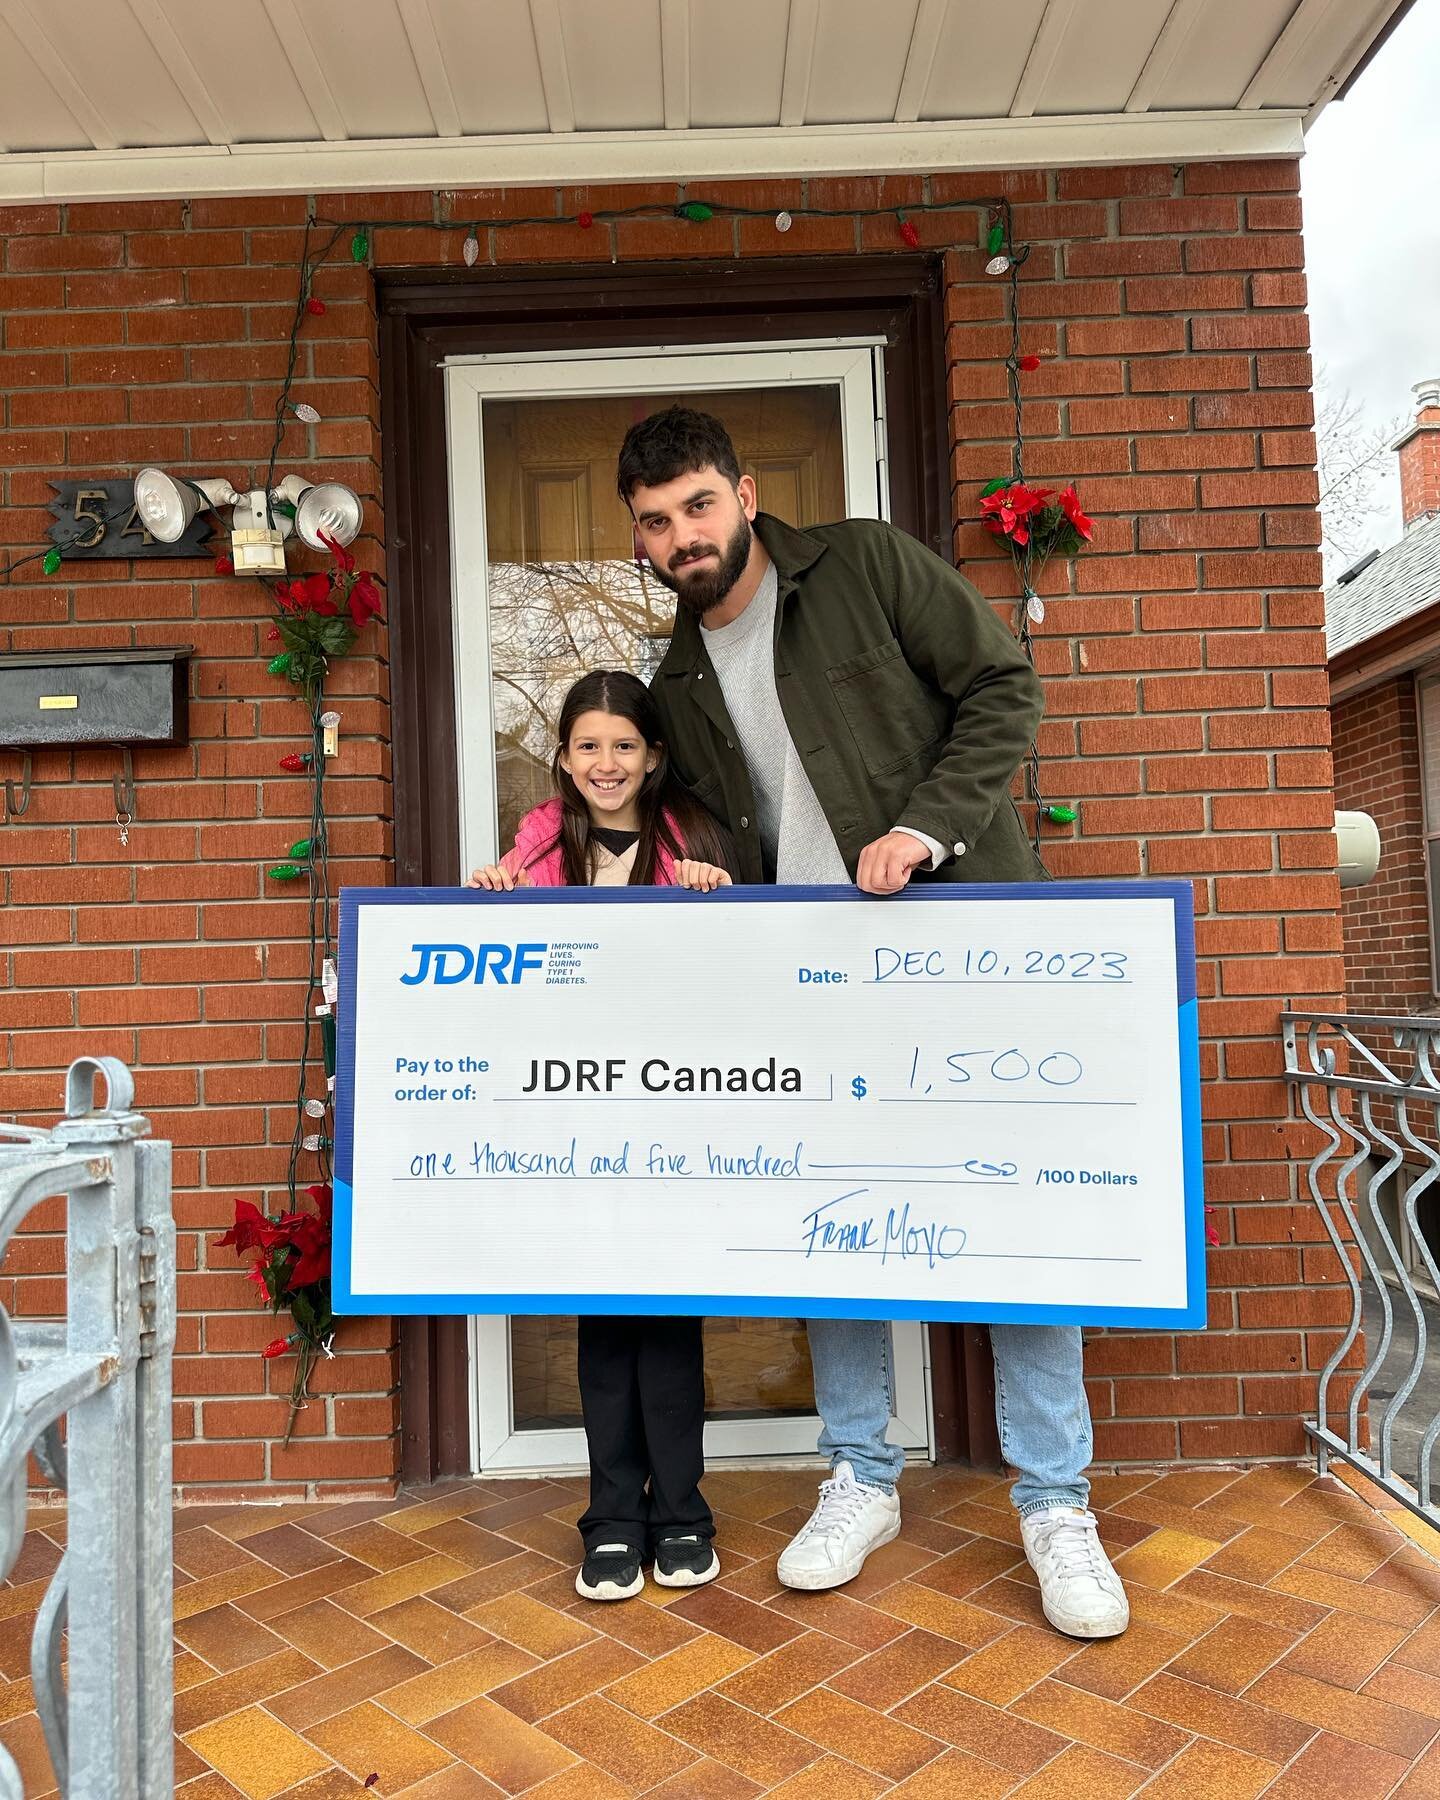 🇨🇦Thank you so much to everyone who purchased beanies for Noemi in support of @jdrf_canada ❤️
-
The past month has been amazing getting to see all the people that have reached out and donated for such an important cause that is very special to us. 